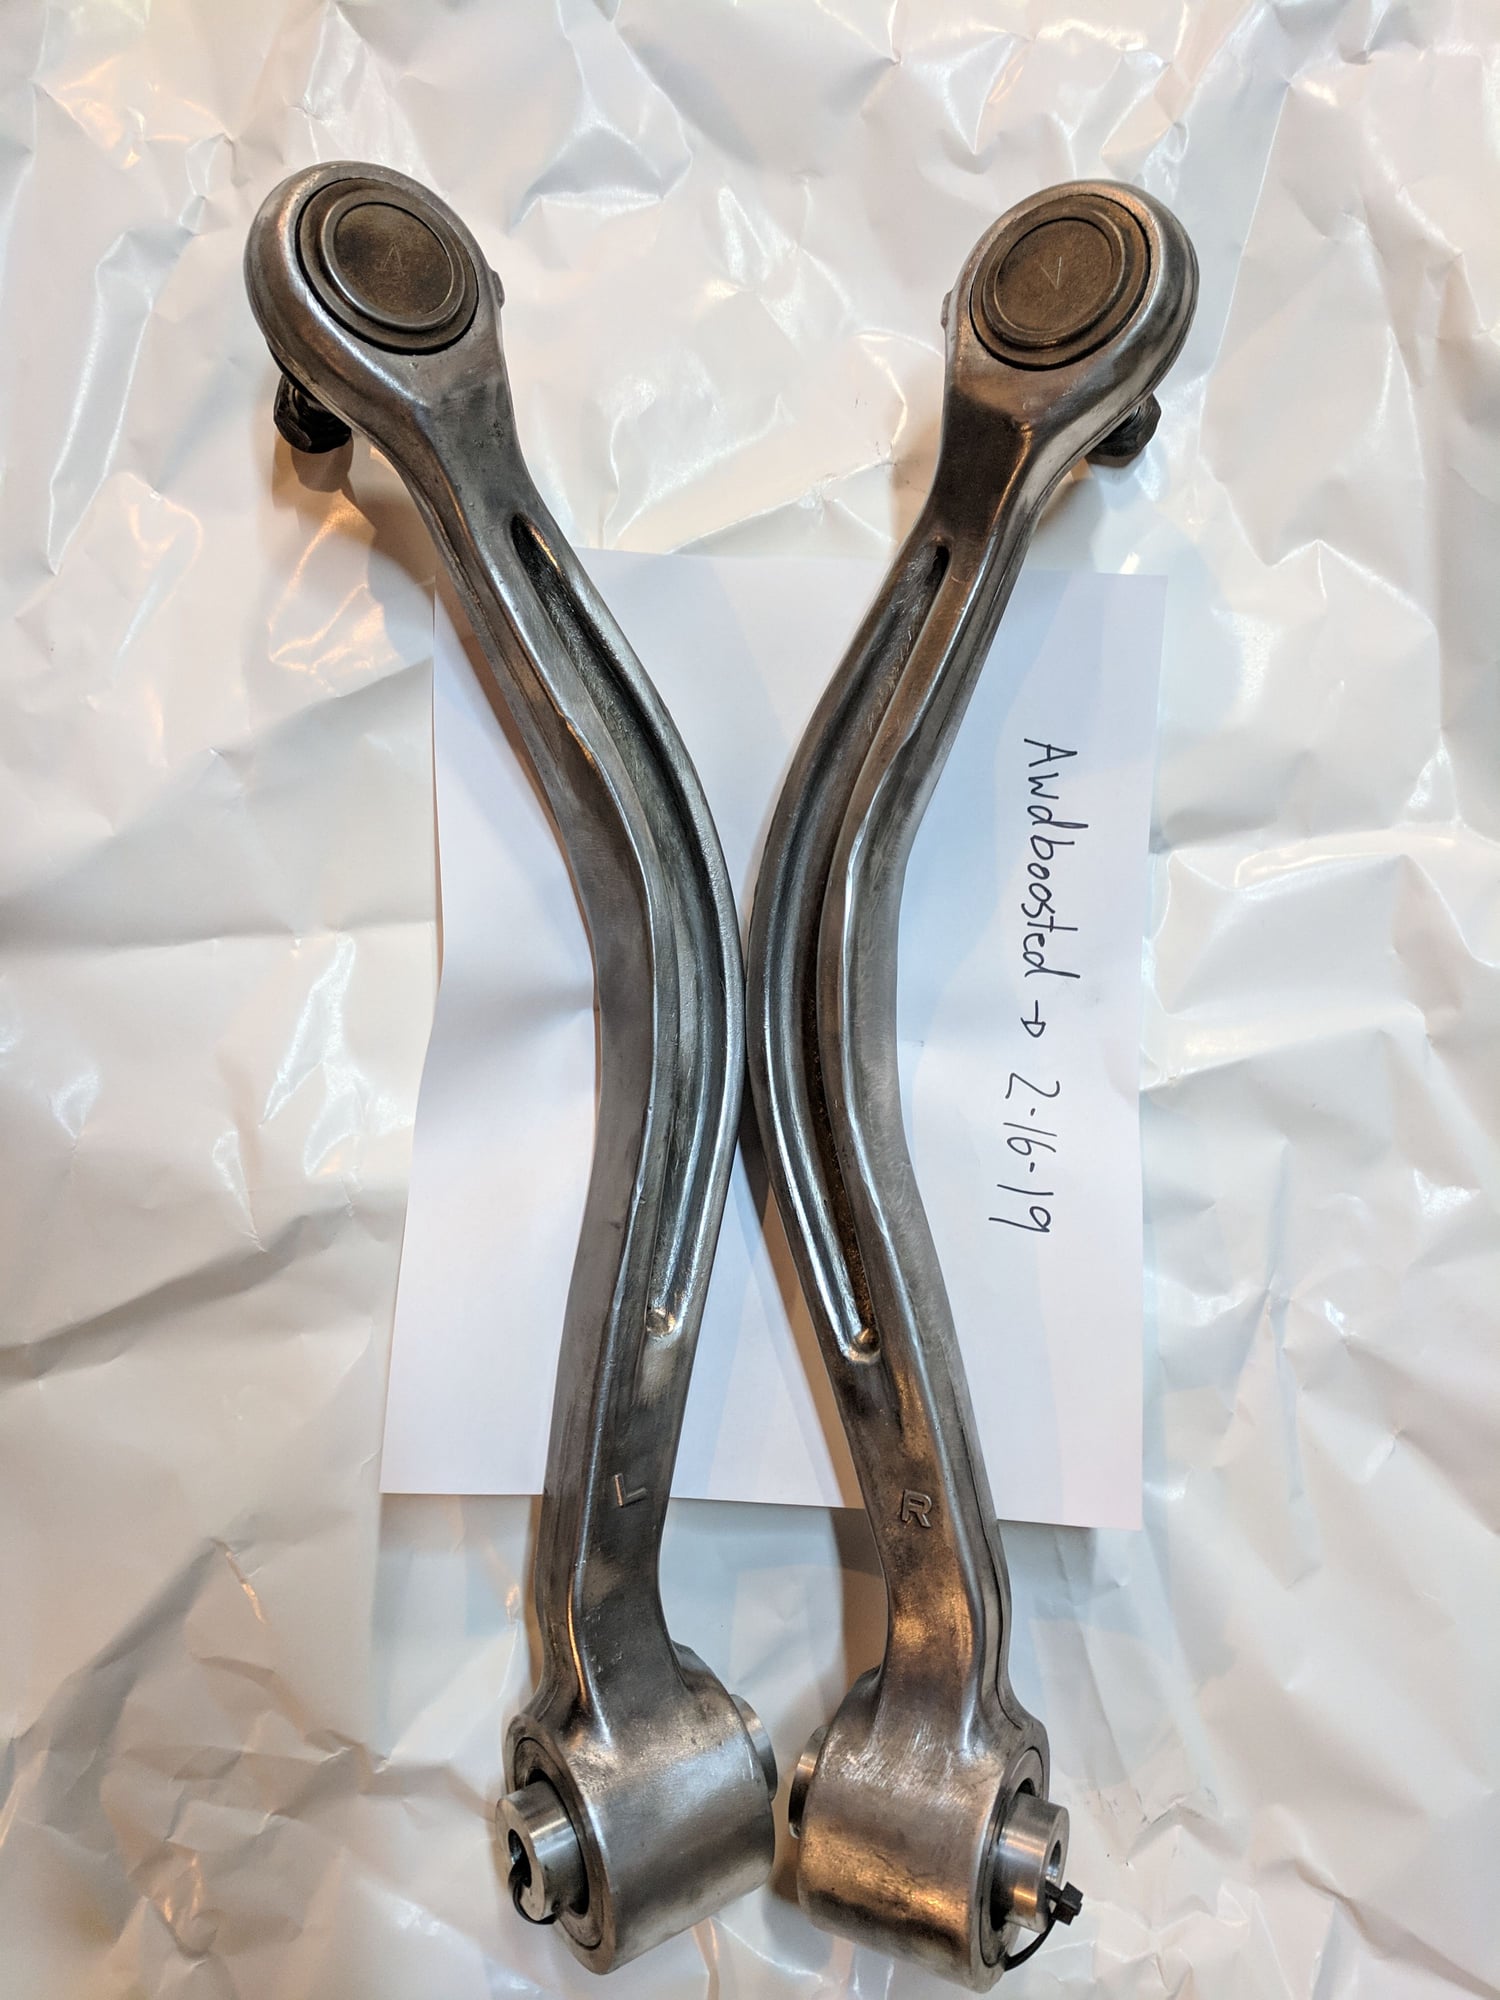 Steering/Suspension - Evo 8/9 rear trailing arms - Used - 2003 to 2006 Mitsubishi Lancer Evolution - Chicago, IL 60089, United States